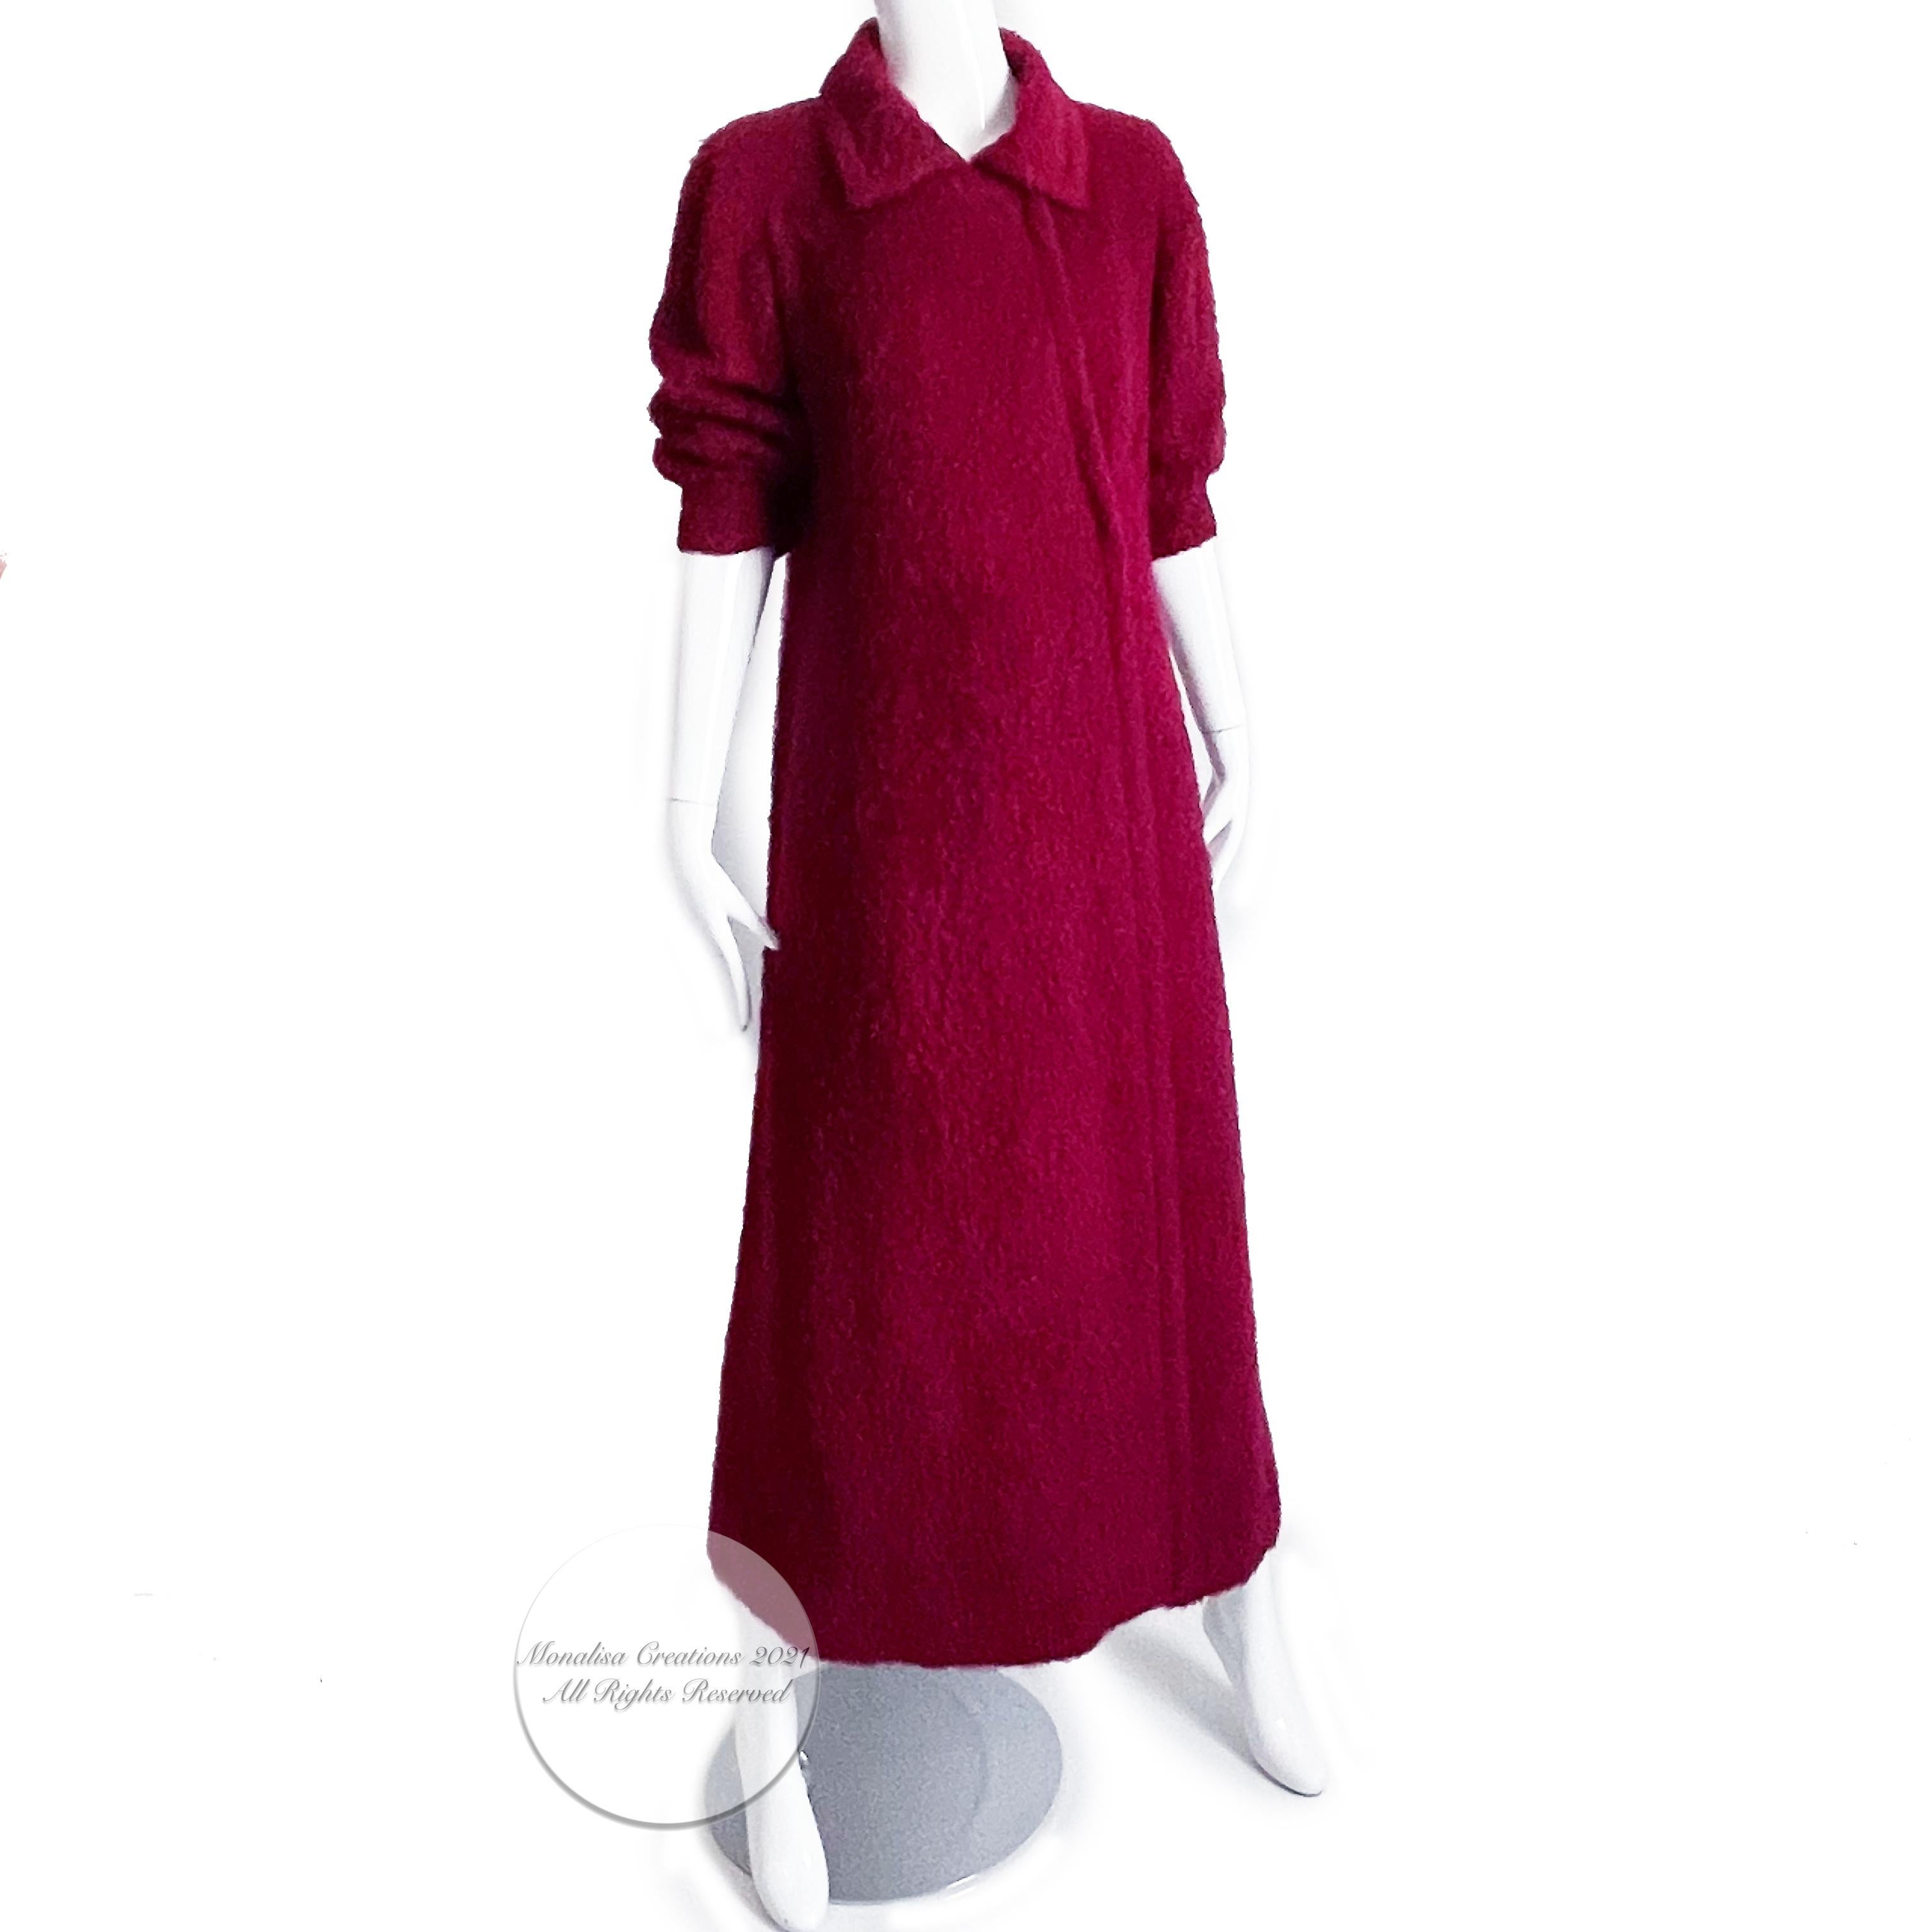 Preowned, vintage Yves Saint Laurent long coat, circa the 60s.  Made from a cranberry boucle wool knit, it has 3/4 sleeves, hidden snap closures, and is lined in pink silk.  No content or size label/dry clean recommended.  Preowned/vintage (50+